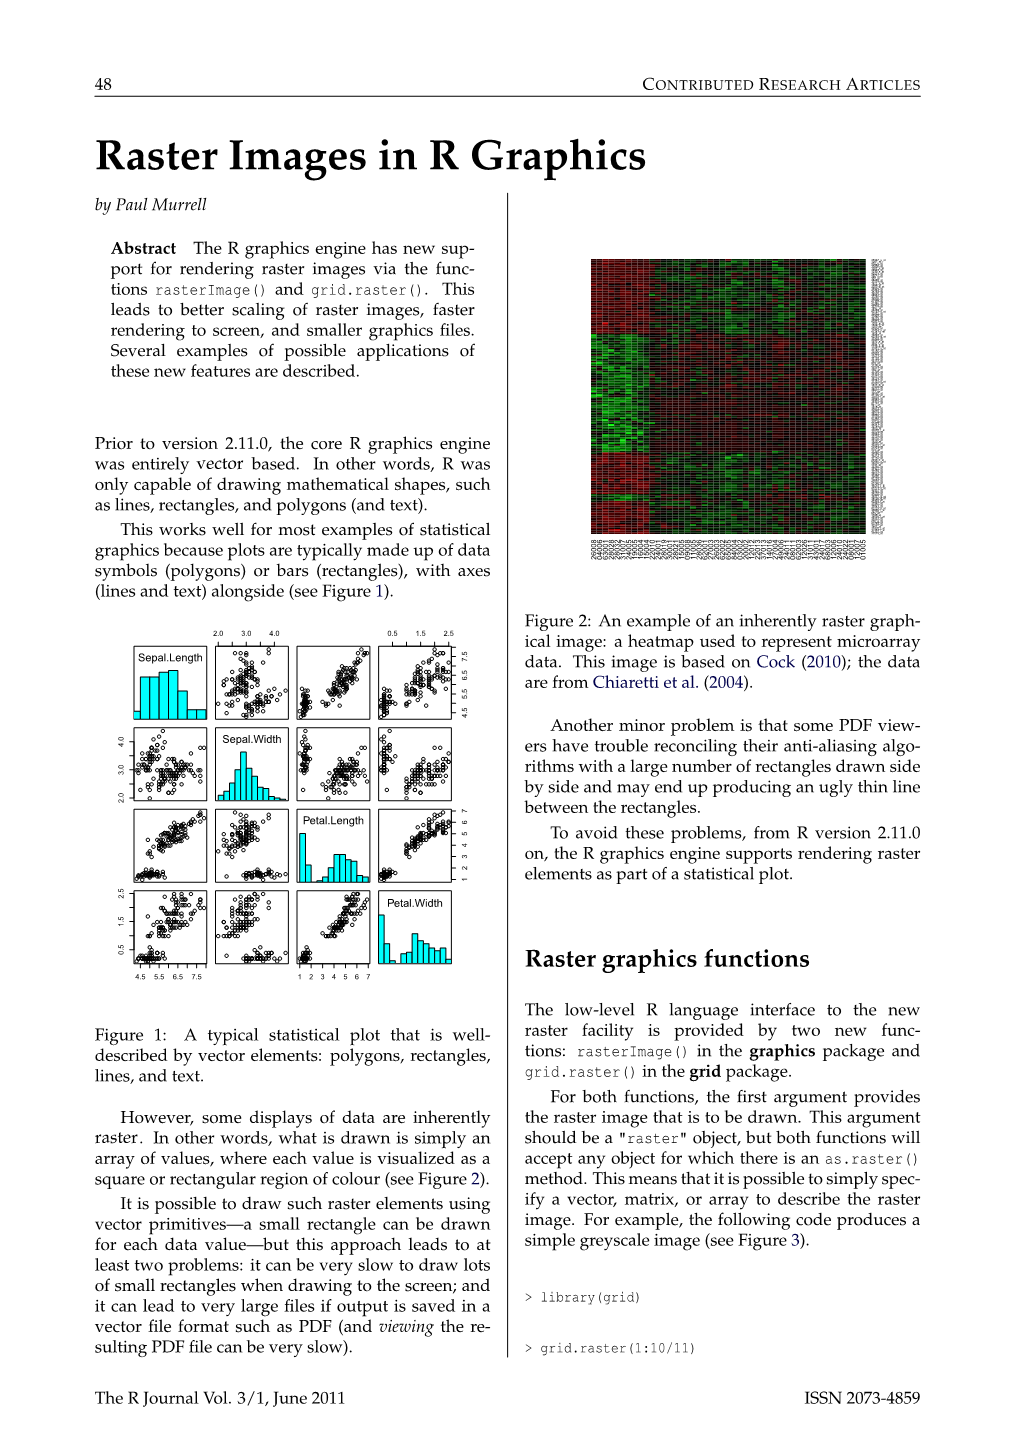 Raster Images in R Graphics by Paul Murrell